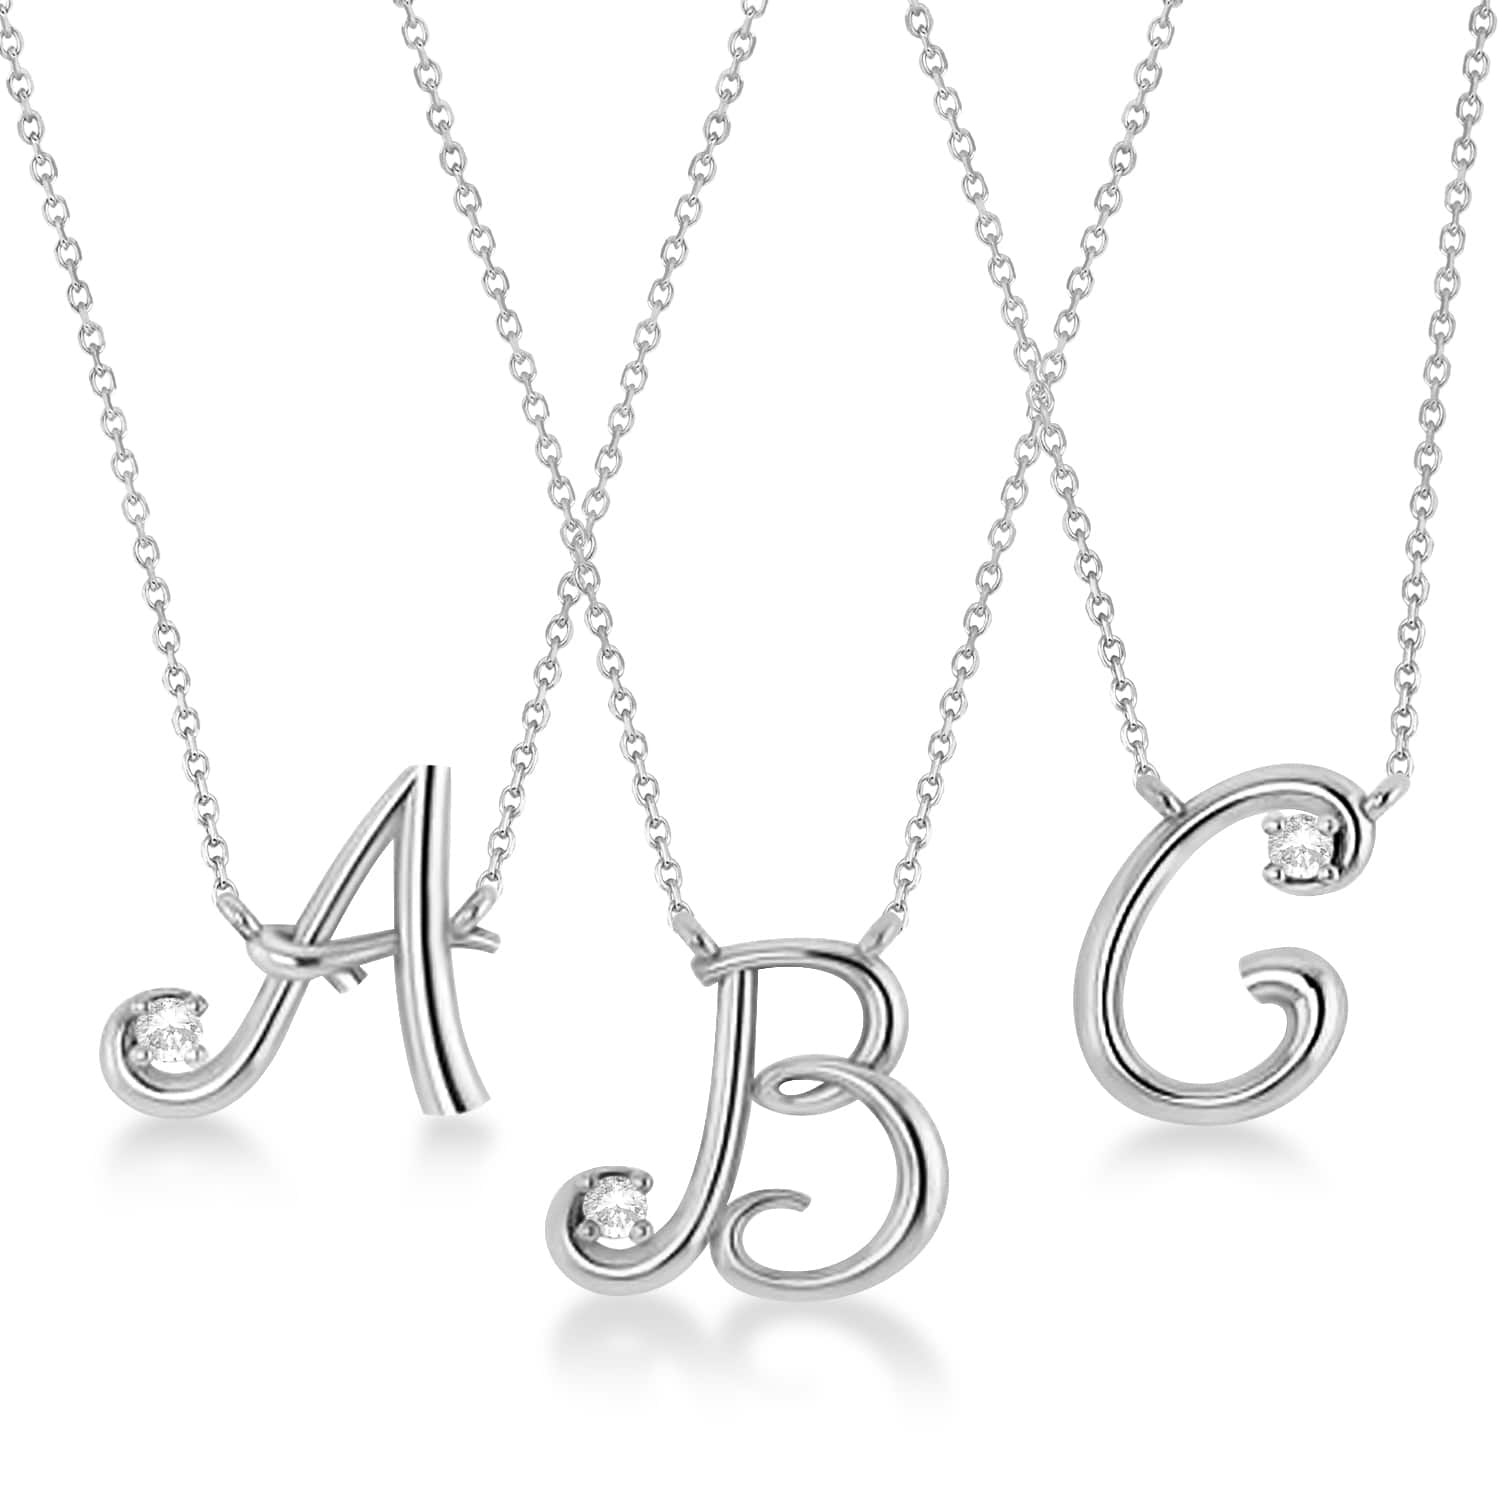 Personalized Diamond Initial Pendant Necklace 14k White Gold (0.05ct)